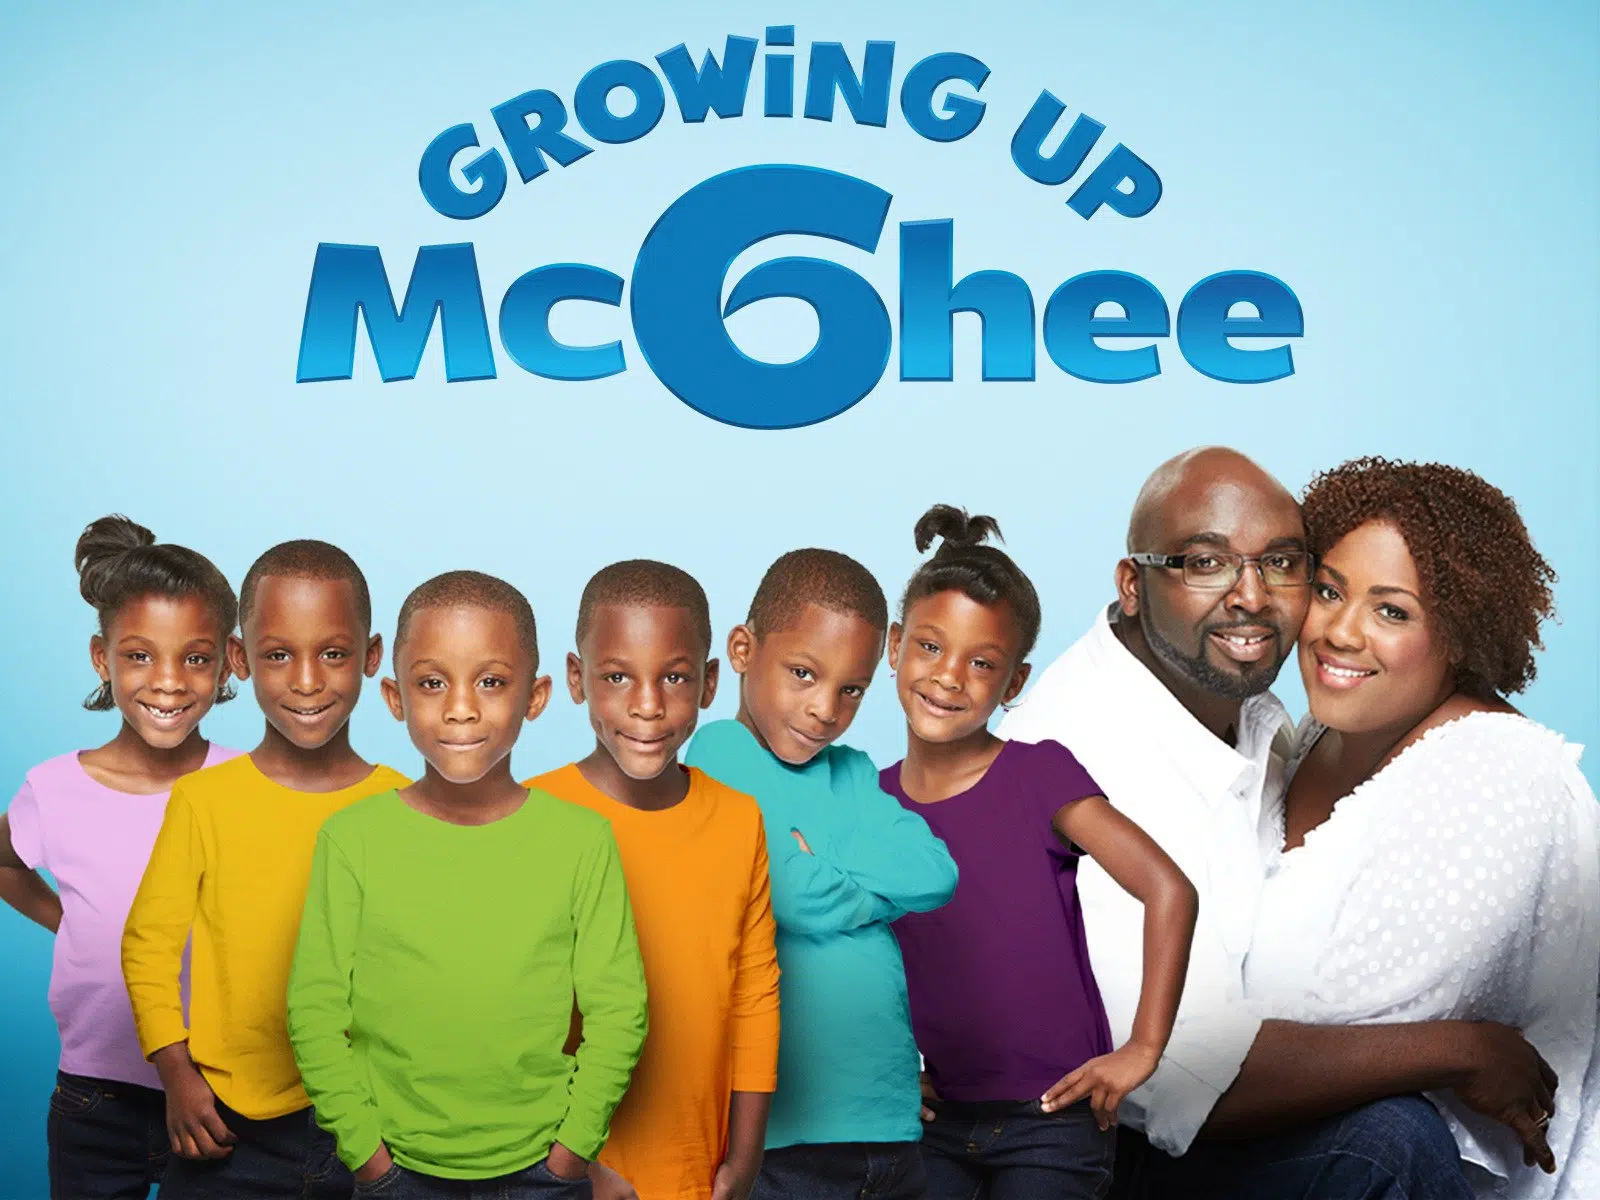 Growing up with the McGhee / Amazon prime